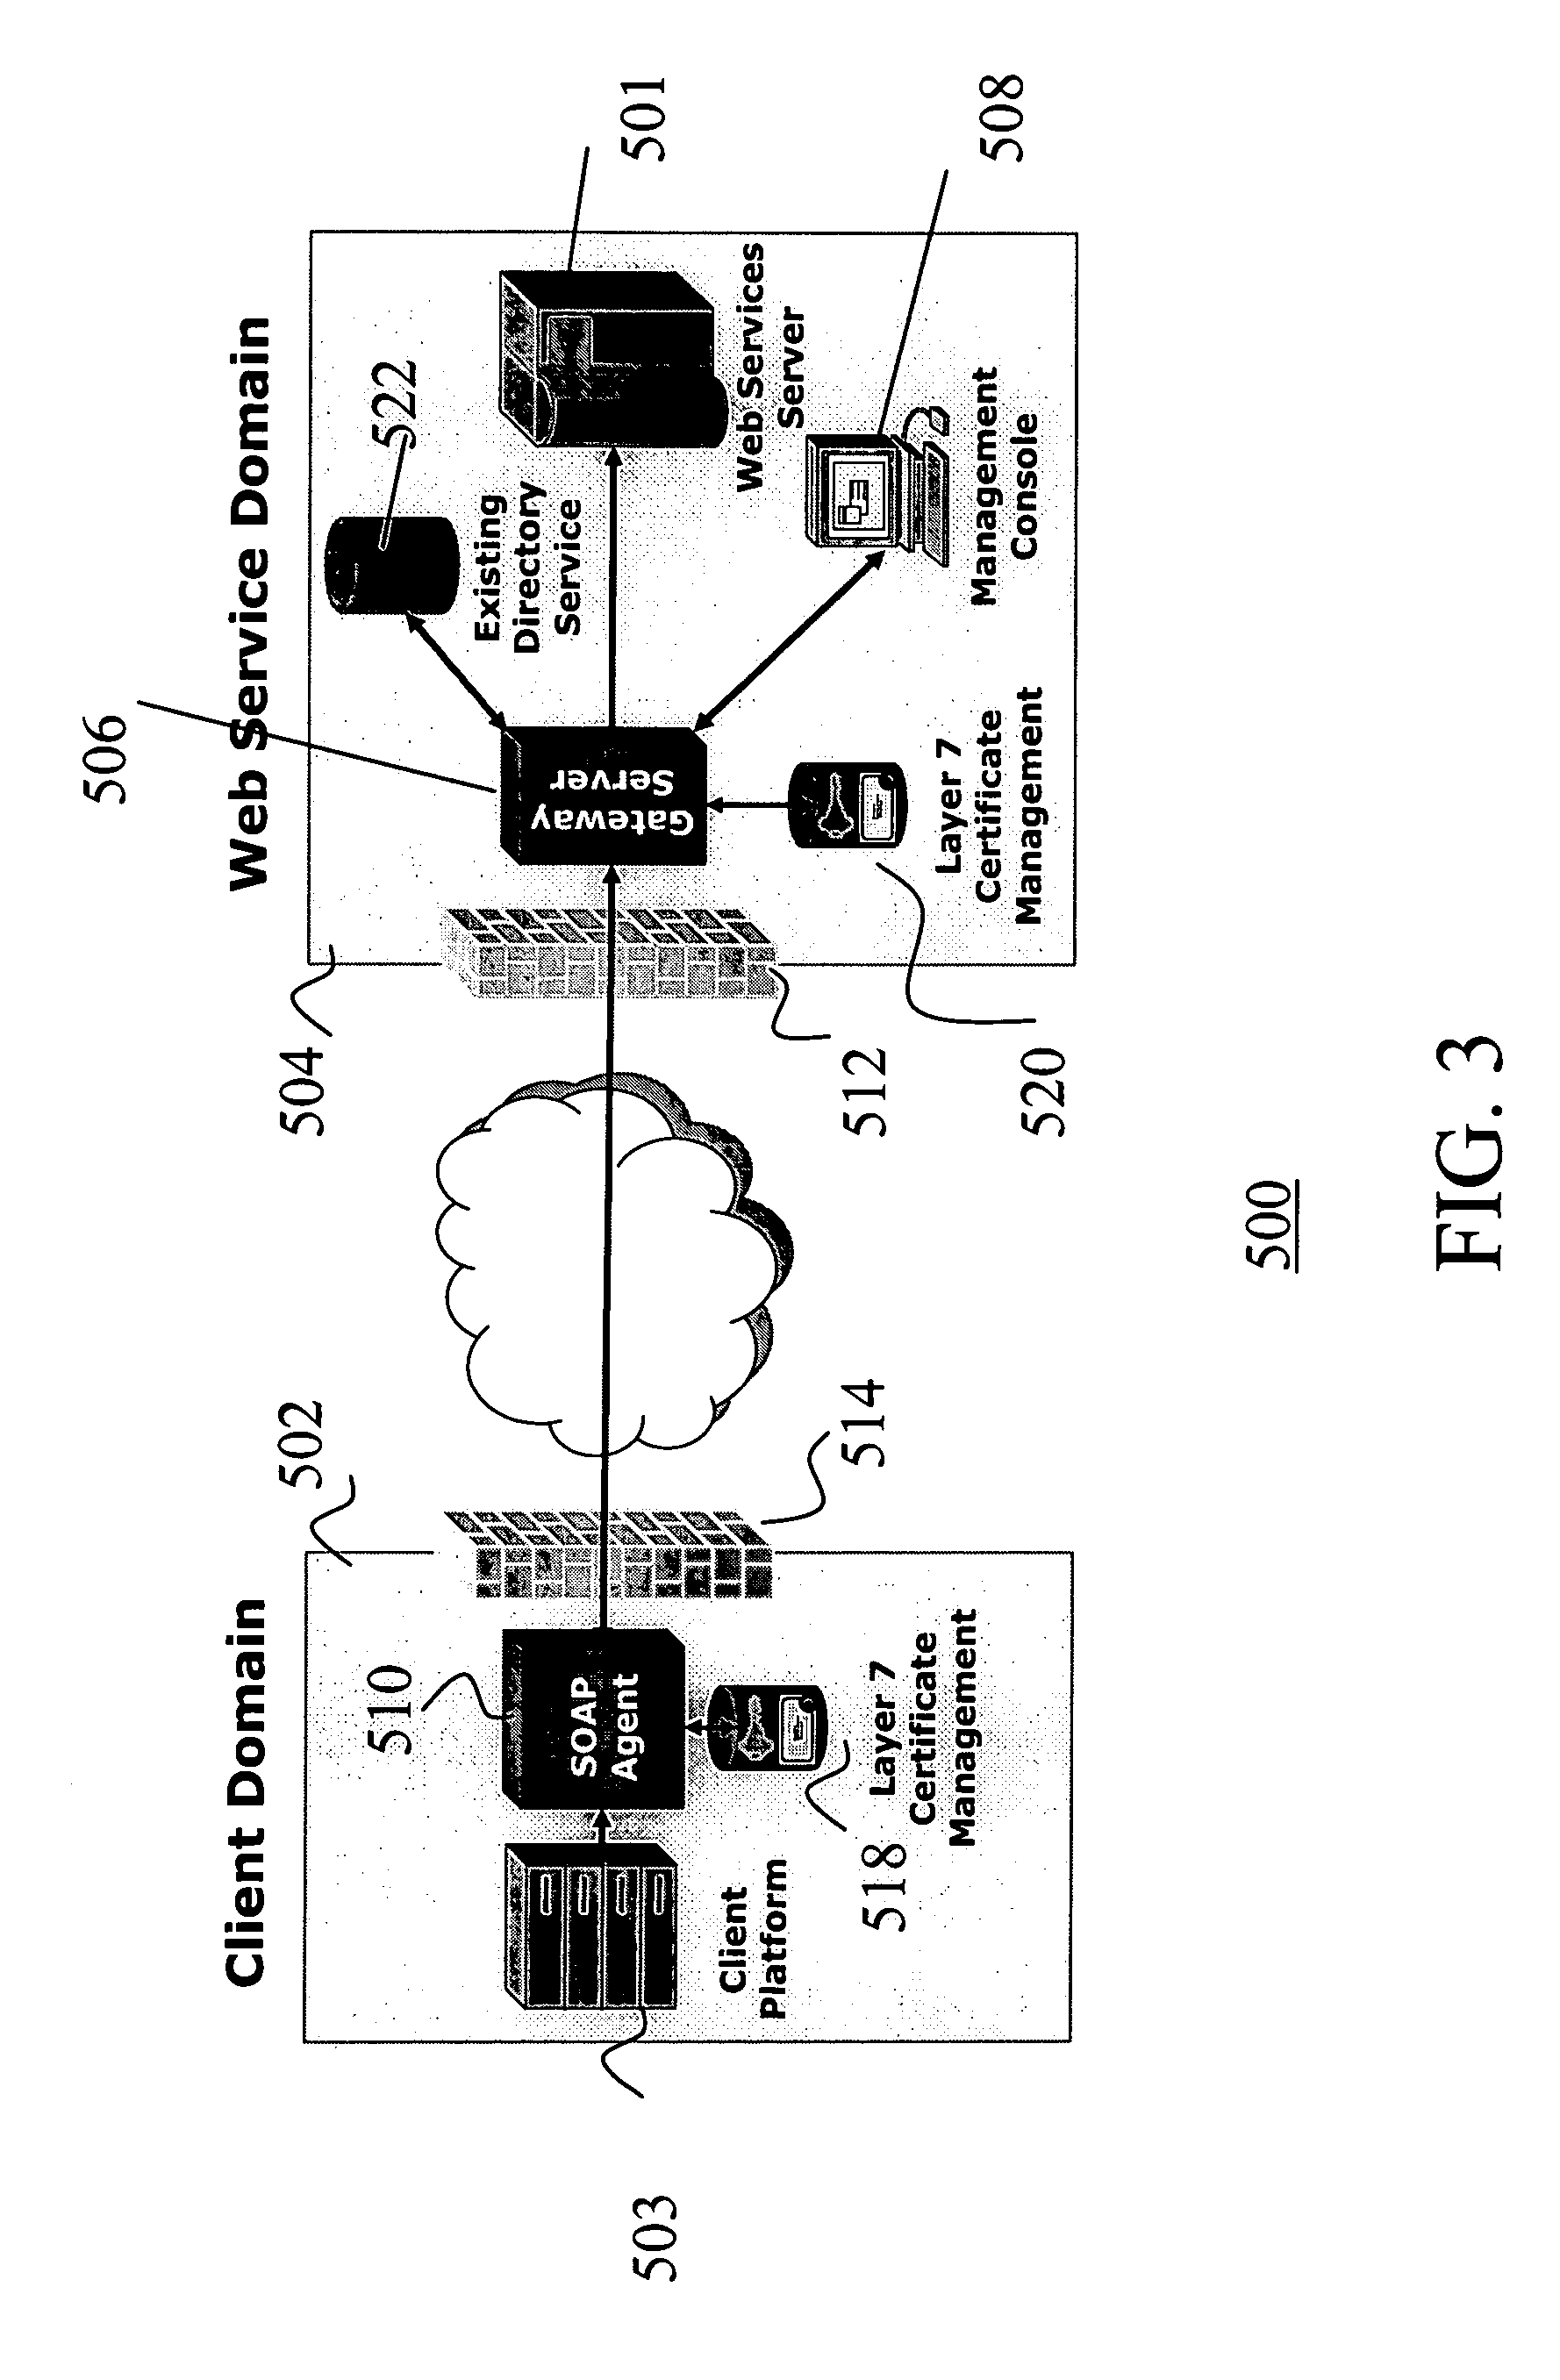 System and method securing web services